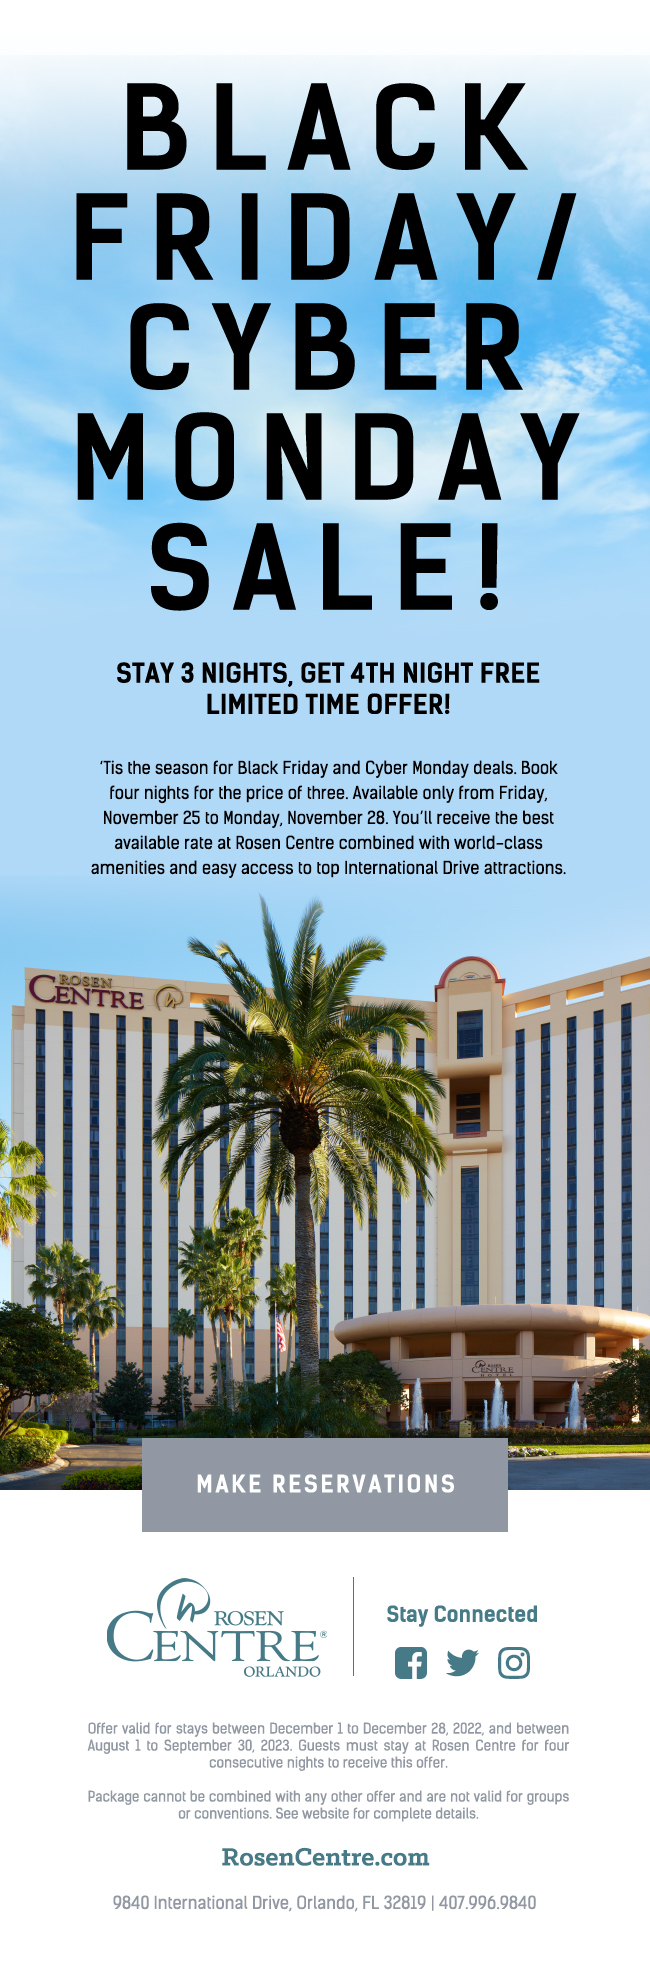 Black Friday / Cyber Monday Sale
		  
Stay 3 Nights, Get 4th Night FREE
Limited Time Offer!
		  
‘Tis the season for Black Friday and Cyber Monday deals. Book four nights for the price of three. Available only from Friday, November 25 to Monday, November 28. You’ll receive the best available rate at Rosen Centre combined with world-class amenities and easy access to top International Drive attractions.
		  
Offer valid for stays between December 1 to December 28, 2022, and between August 1 to September 30, 2023. Guests must stay at Rosen Centre for four consecutive nights to receive this offer.

Package cannot be combined with any other offer and are not valid for groups or conventions. See website for complete details.
		  
9840 International Drive, Orlando, FL 32819 | 407.996.9840